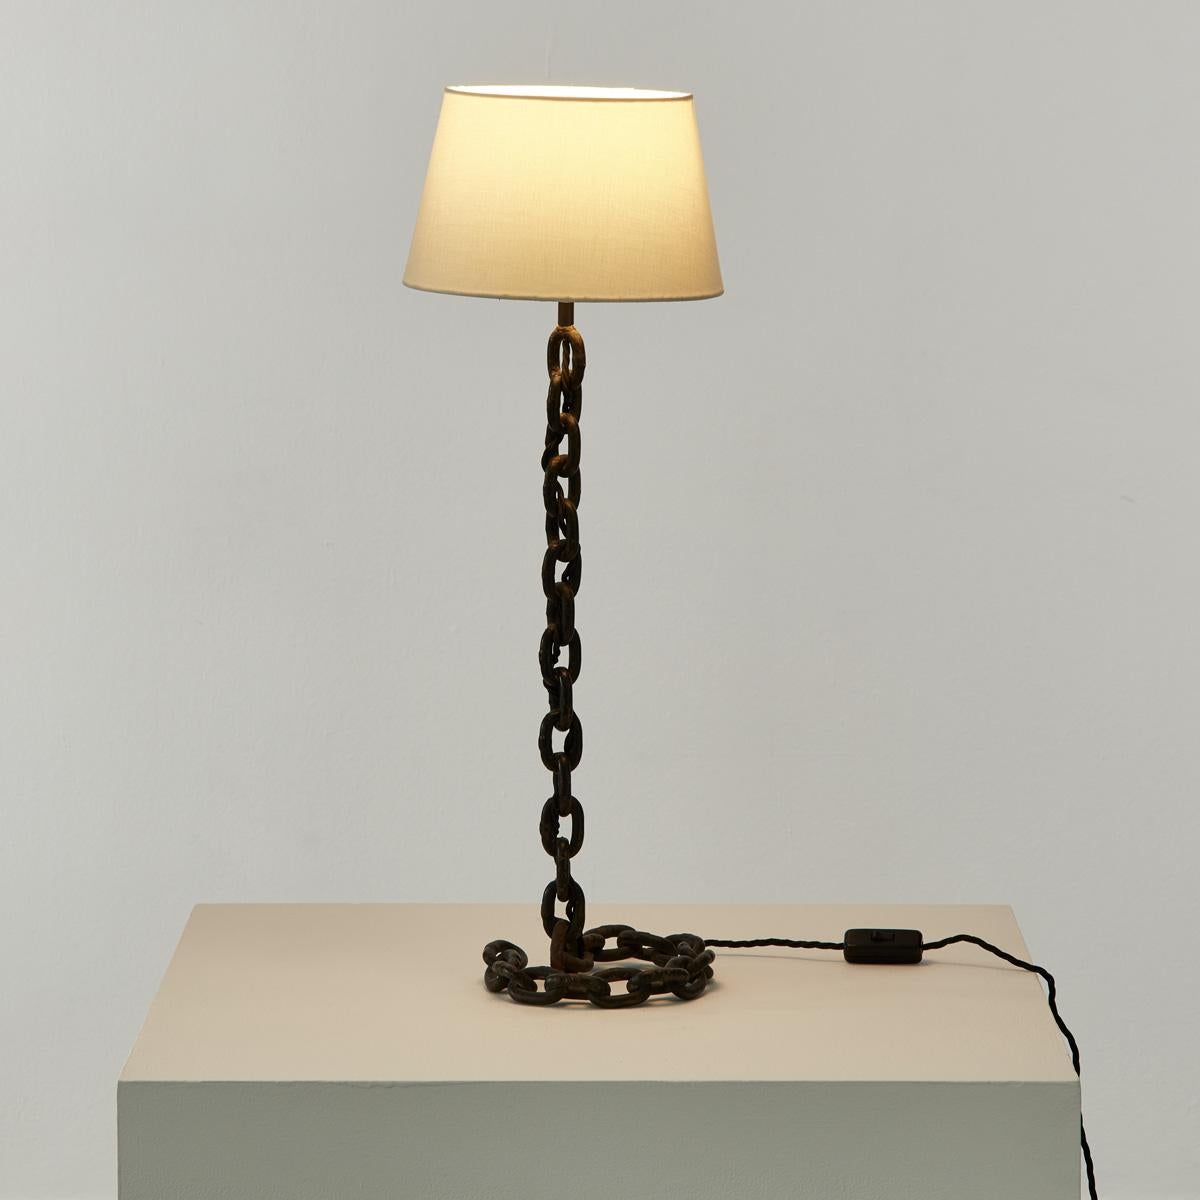 Mid-Century Modern 1950s French Chain-Link Table Lamp in the Manner of Franz West